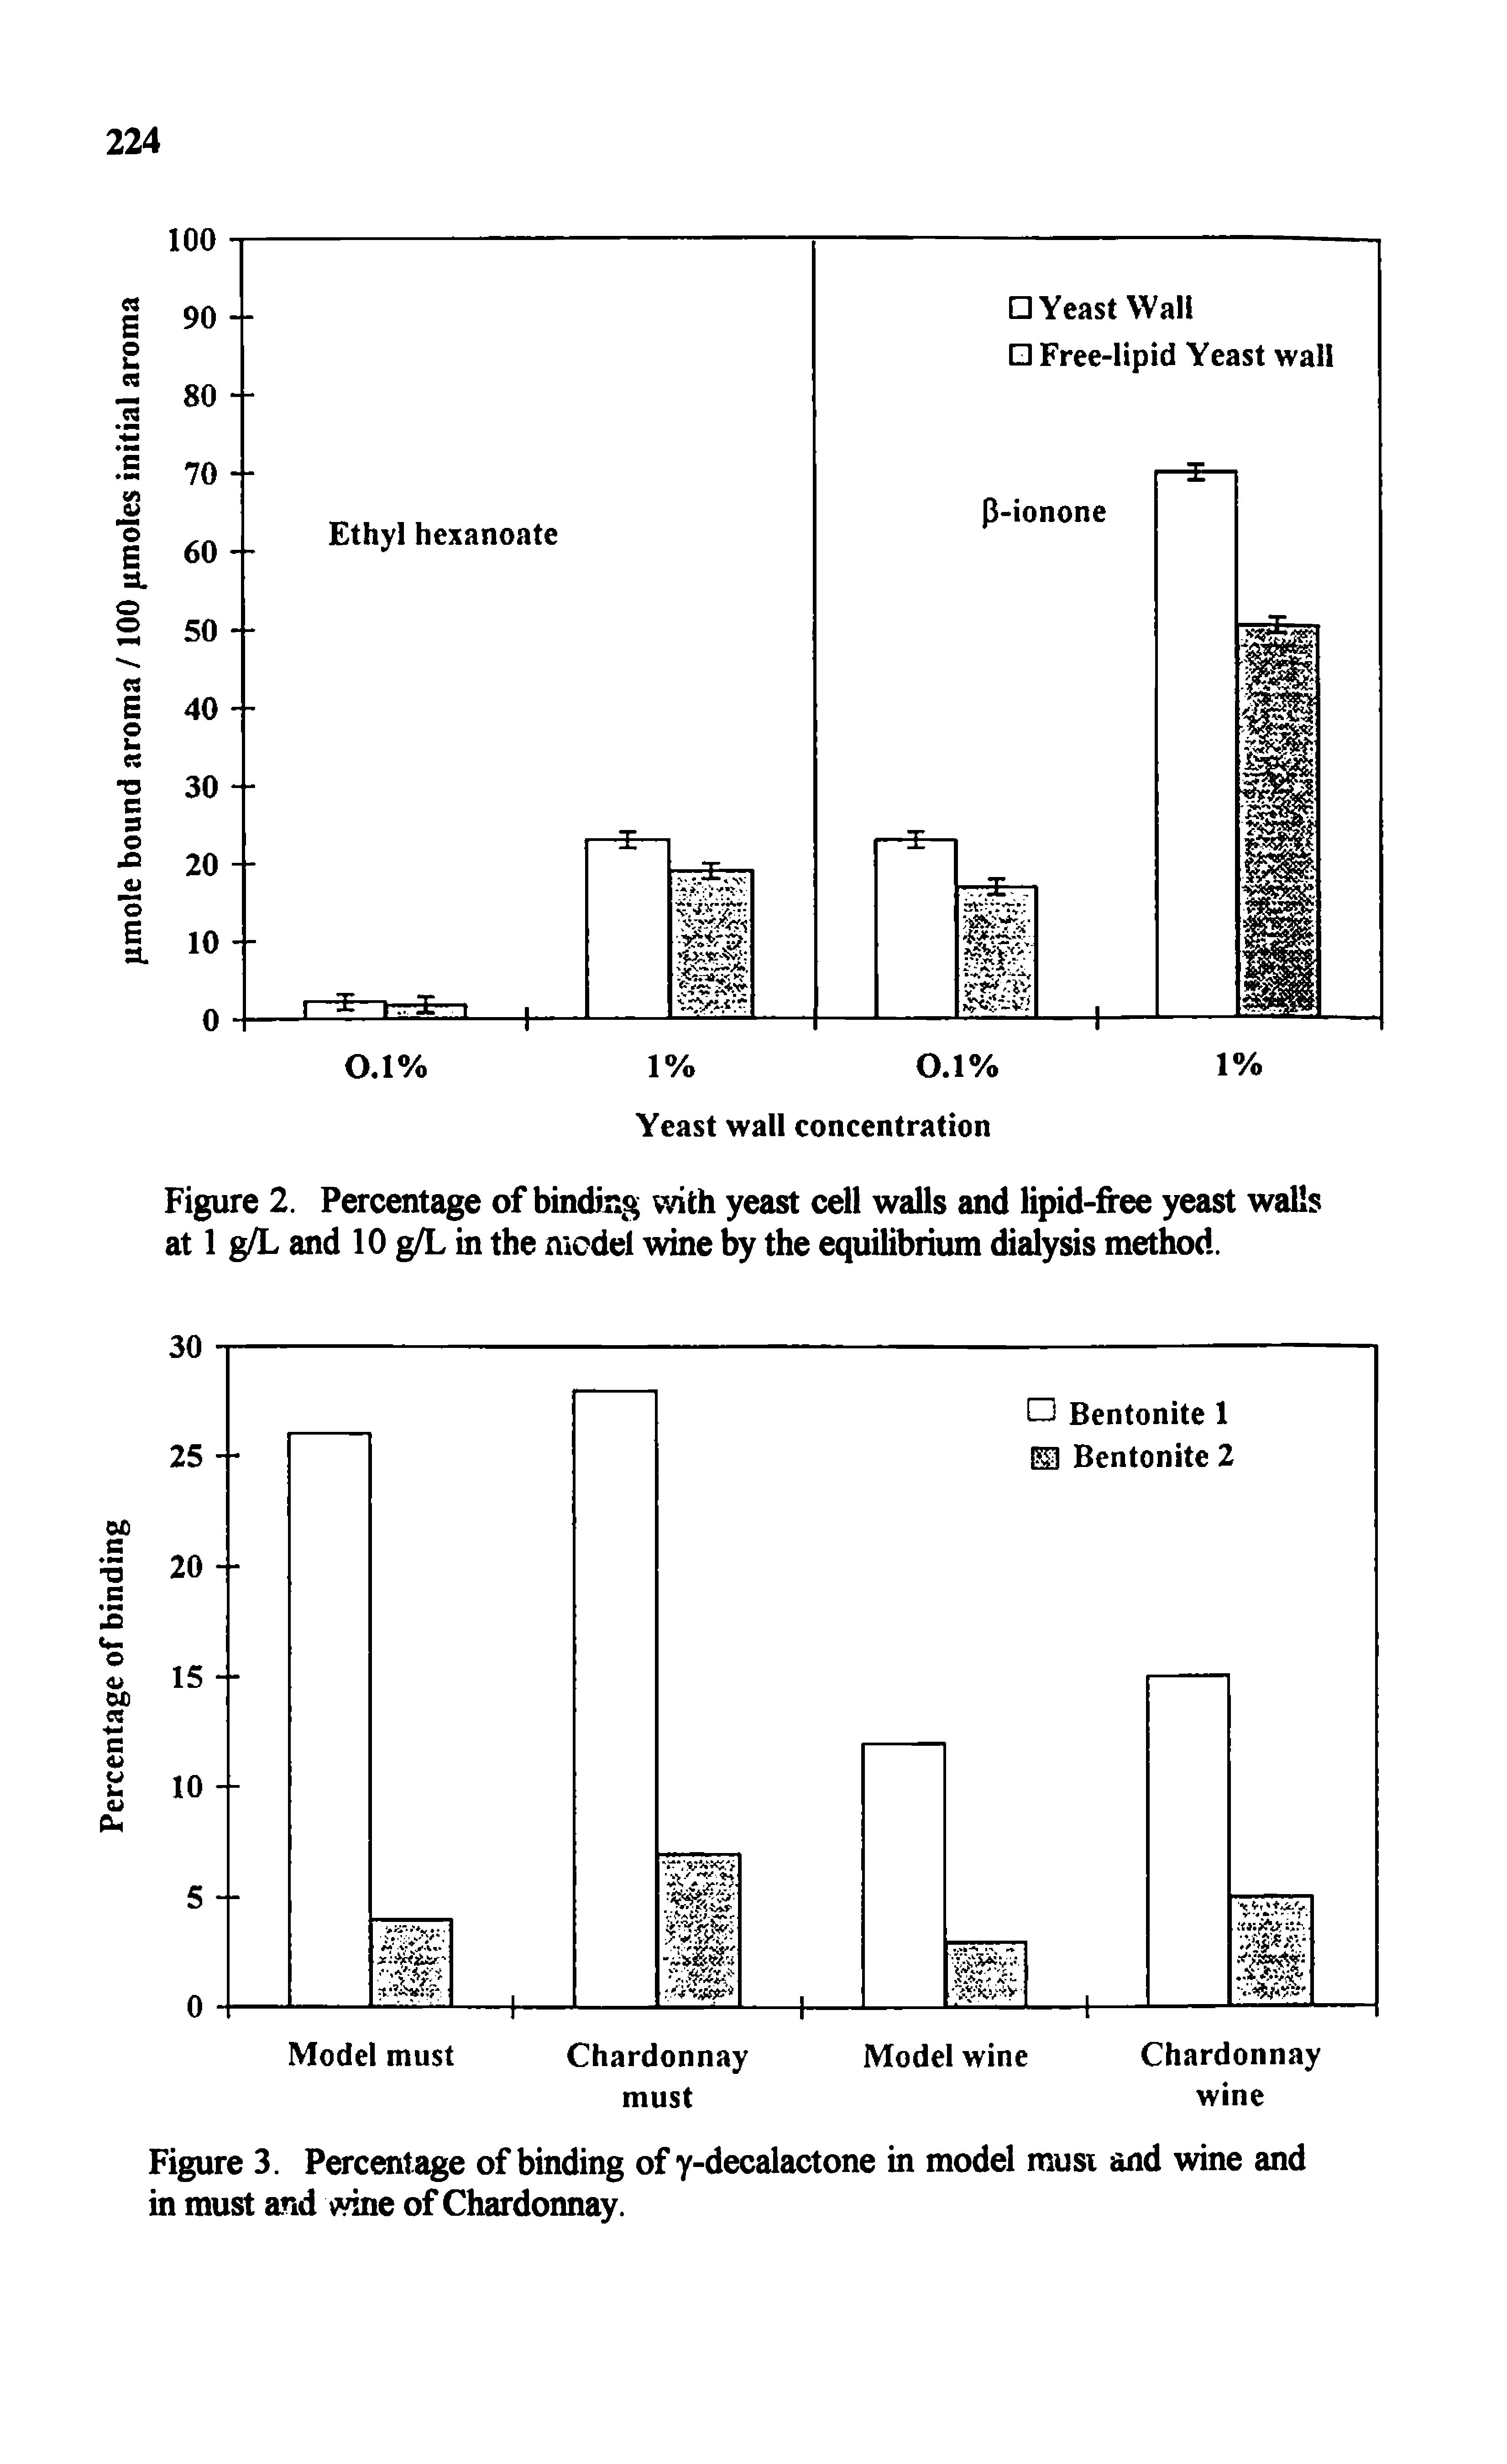 Figure 2. Percentage of binding with yeast cell walls and lipid-free yeast walls at 1 g/L and 10 g/L in the model wine by the equilibrium dialysis method.